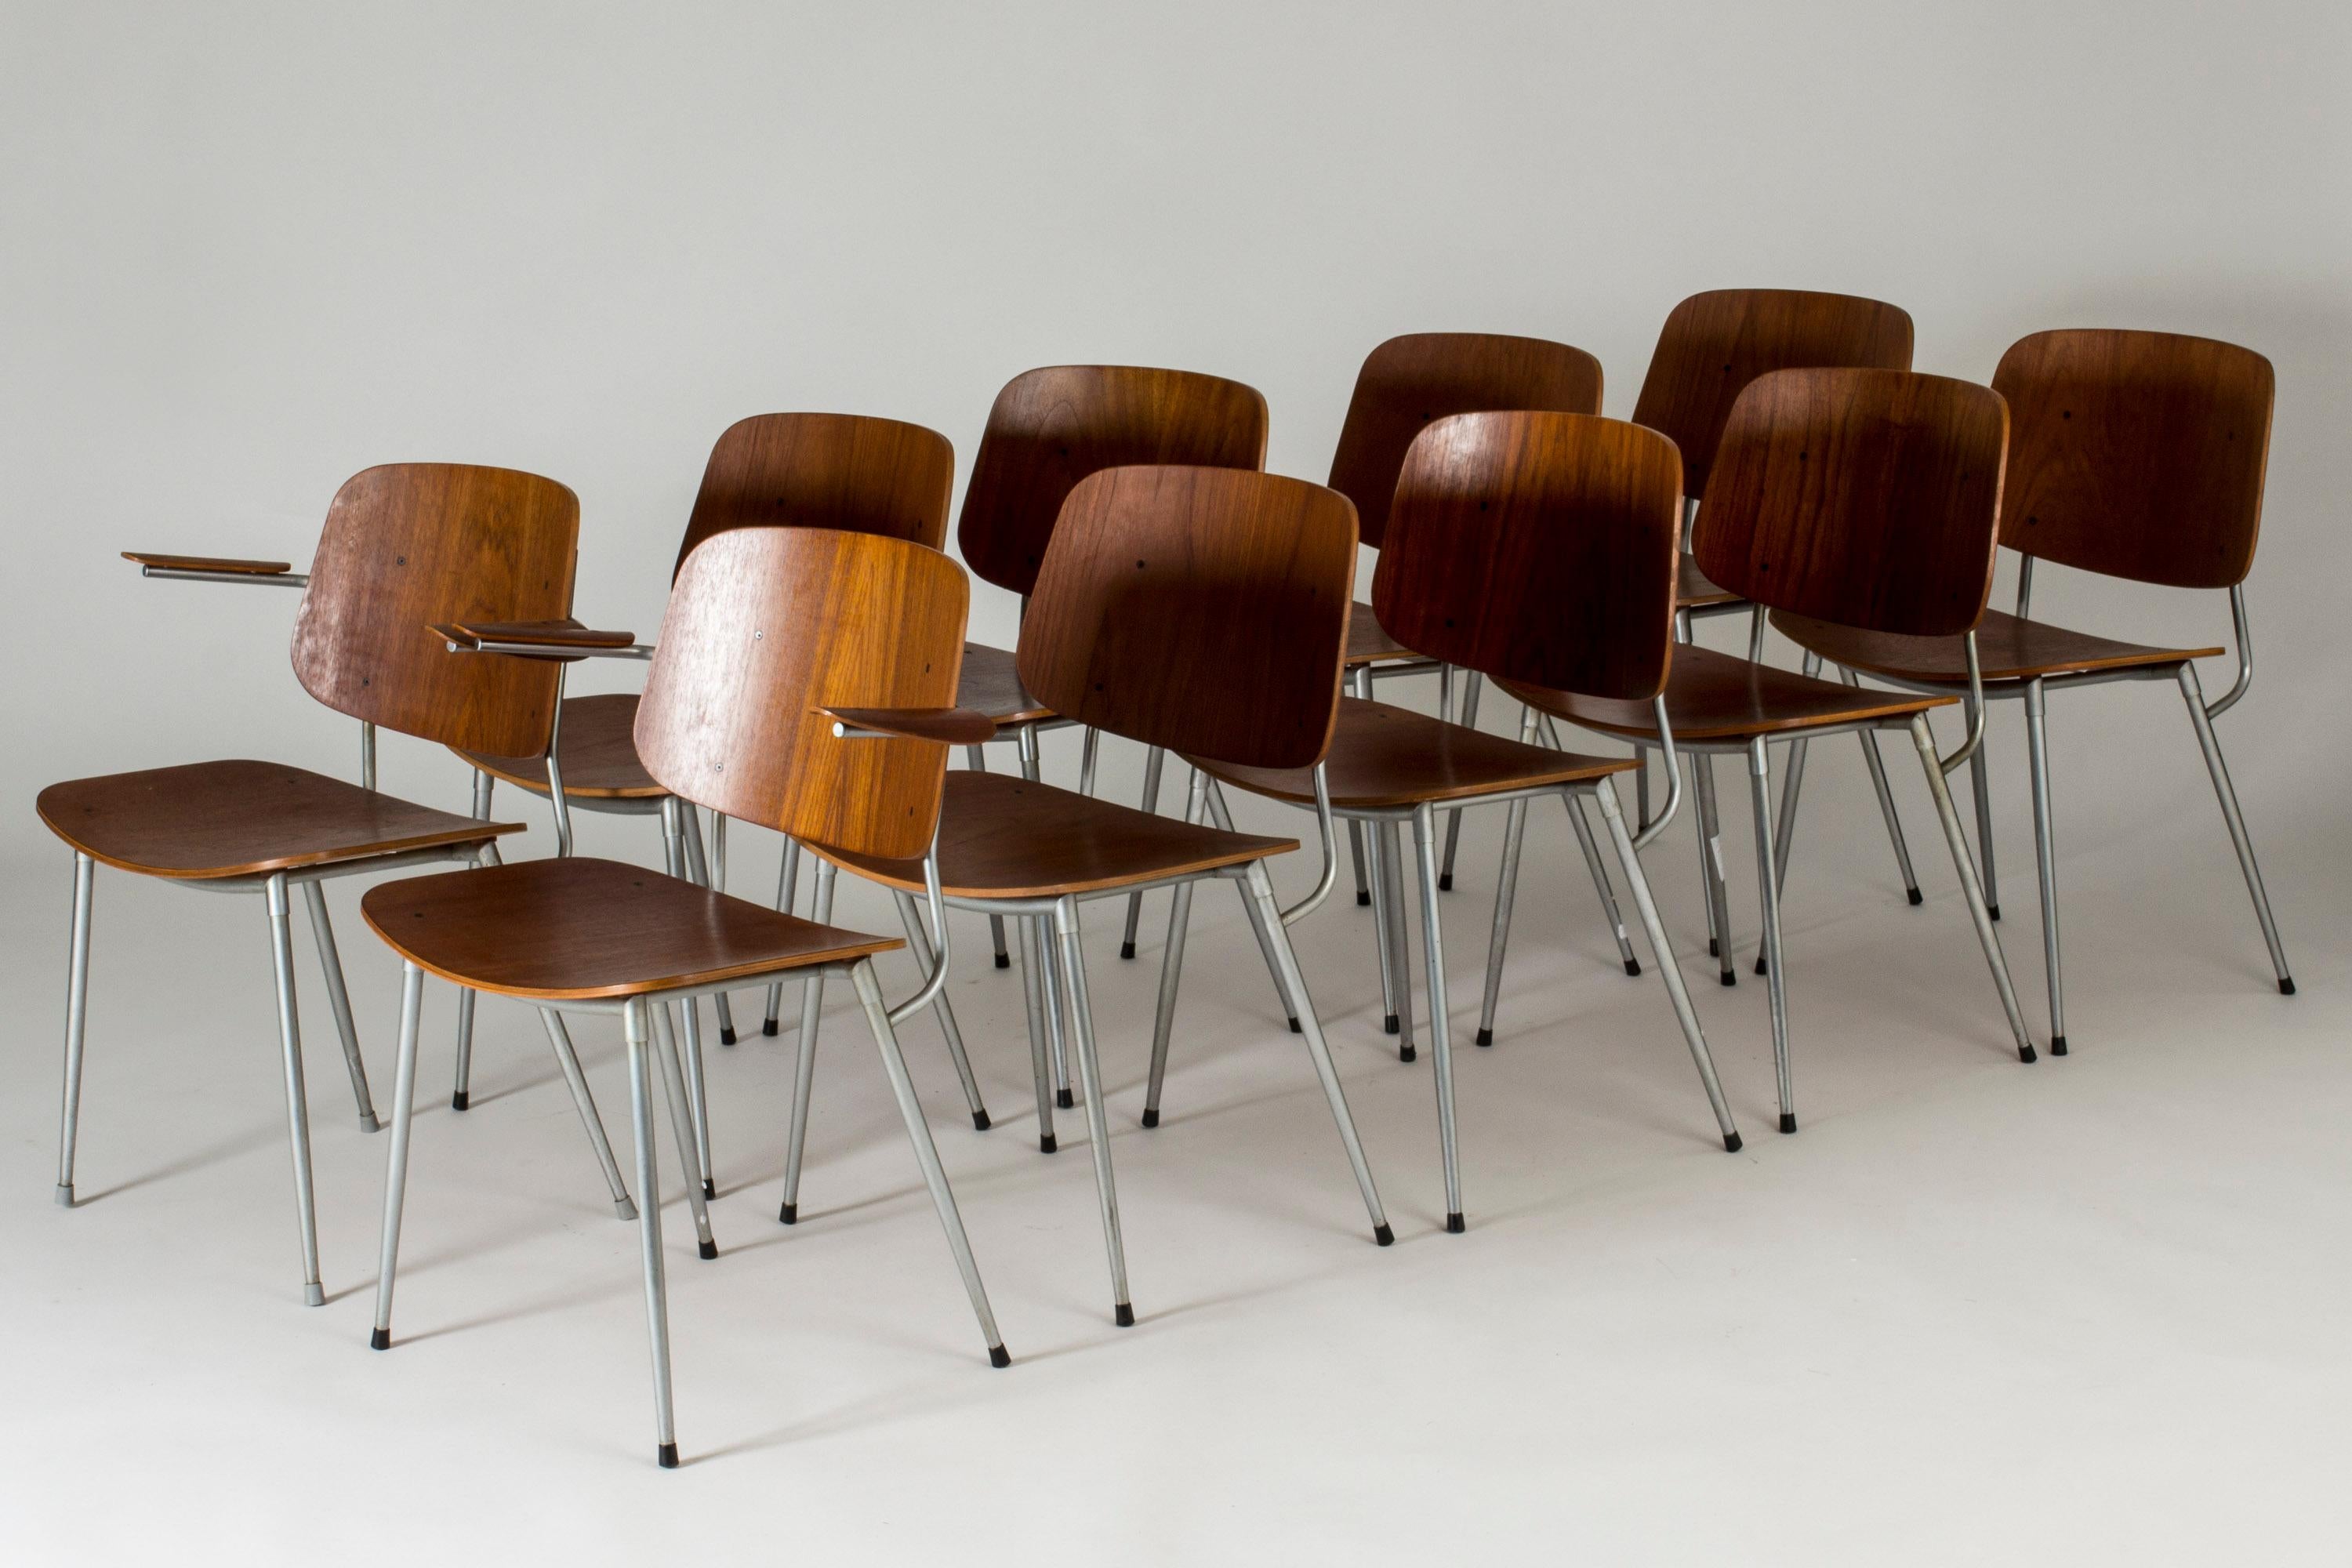 Set of ten teak dining chairs by Børge Mogensen, model 155, in a rare edition with steel legs. Elegant, light expression. Two of the chairs have armrests with beautifully curved teak.